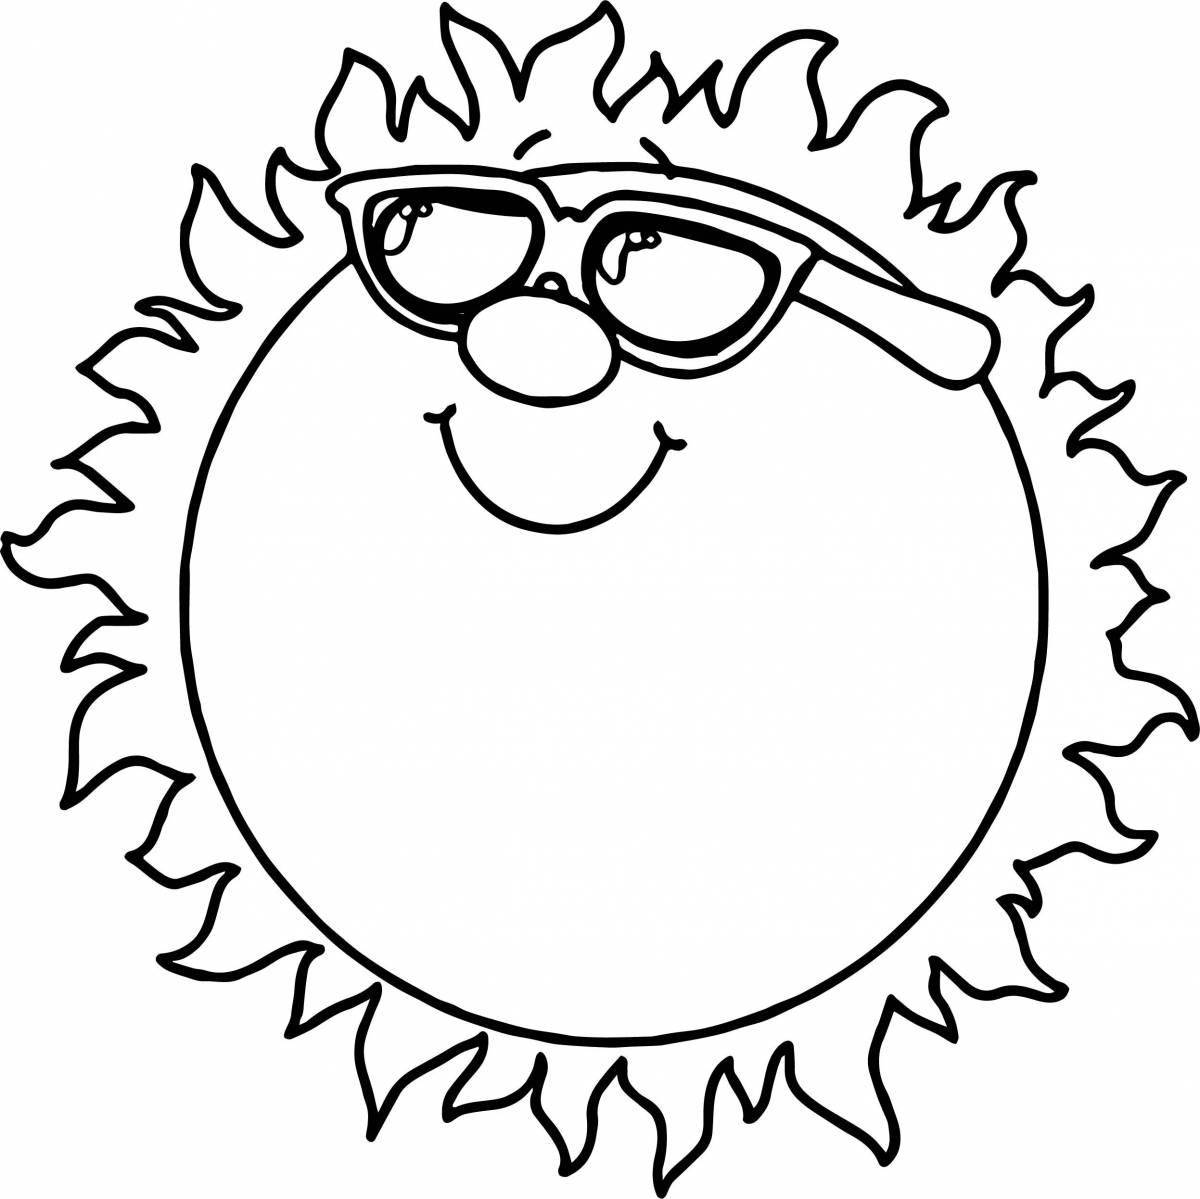 Great sun coloring book for kids